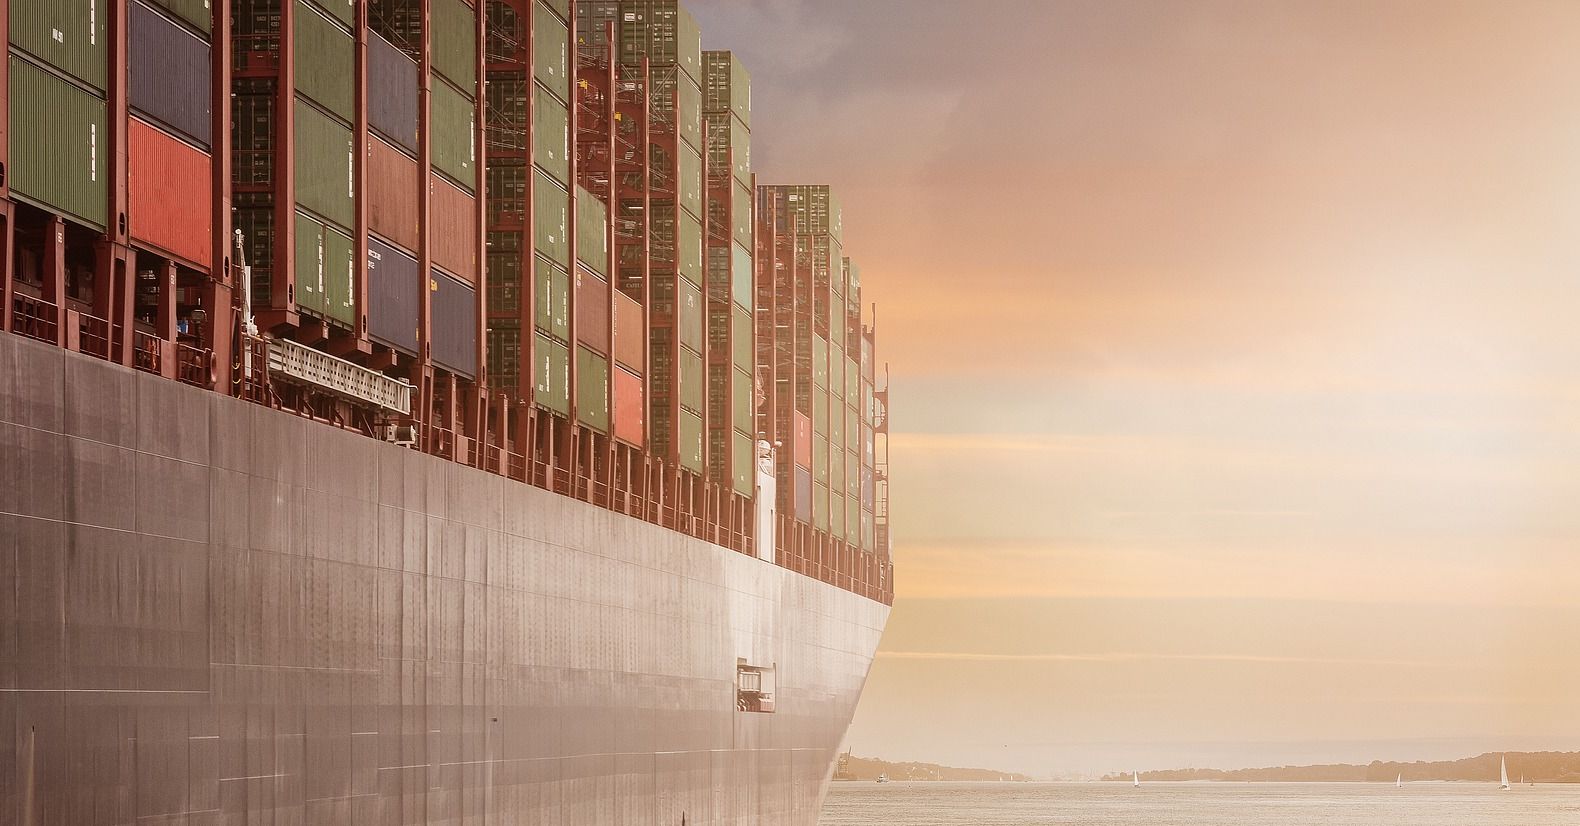 Benefits of container technology